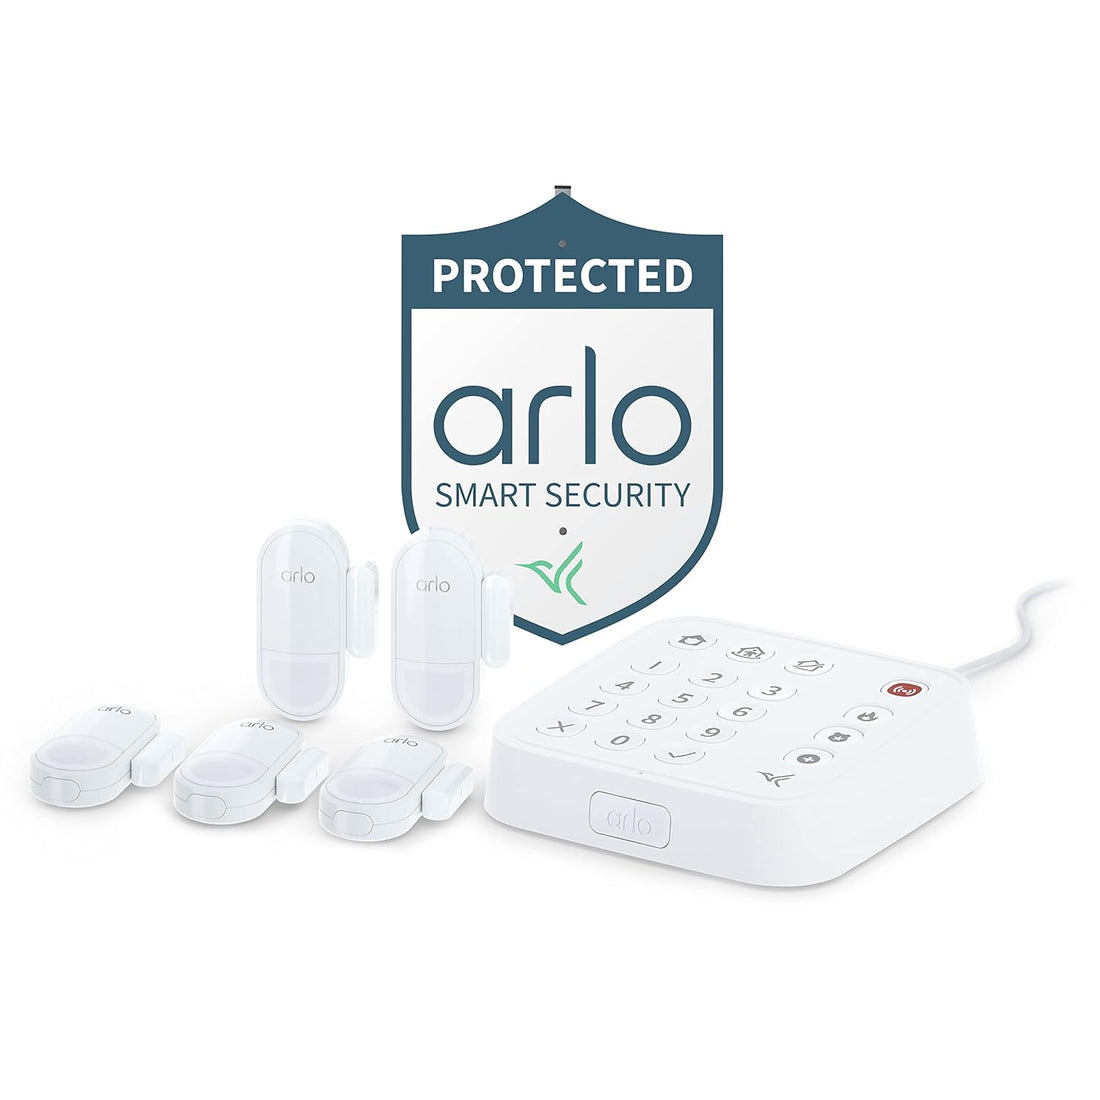 Arlo Home Security System - Wired Keypad Sensor Hub, (5) 8-in-1 Sensors, Yard Sign, 24/7 Professional Monitoring- No Contract Required, DIY Installation, Alarm System for Home Security - SS1501